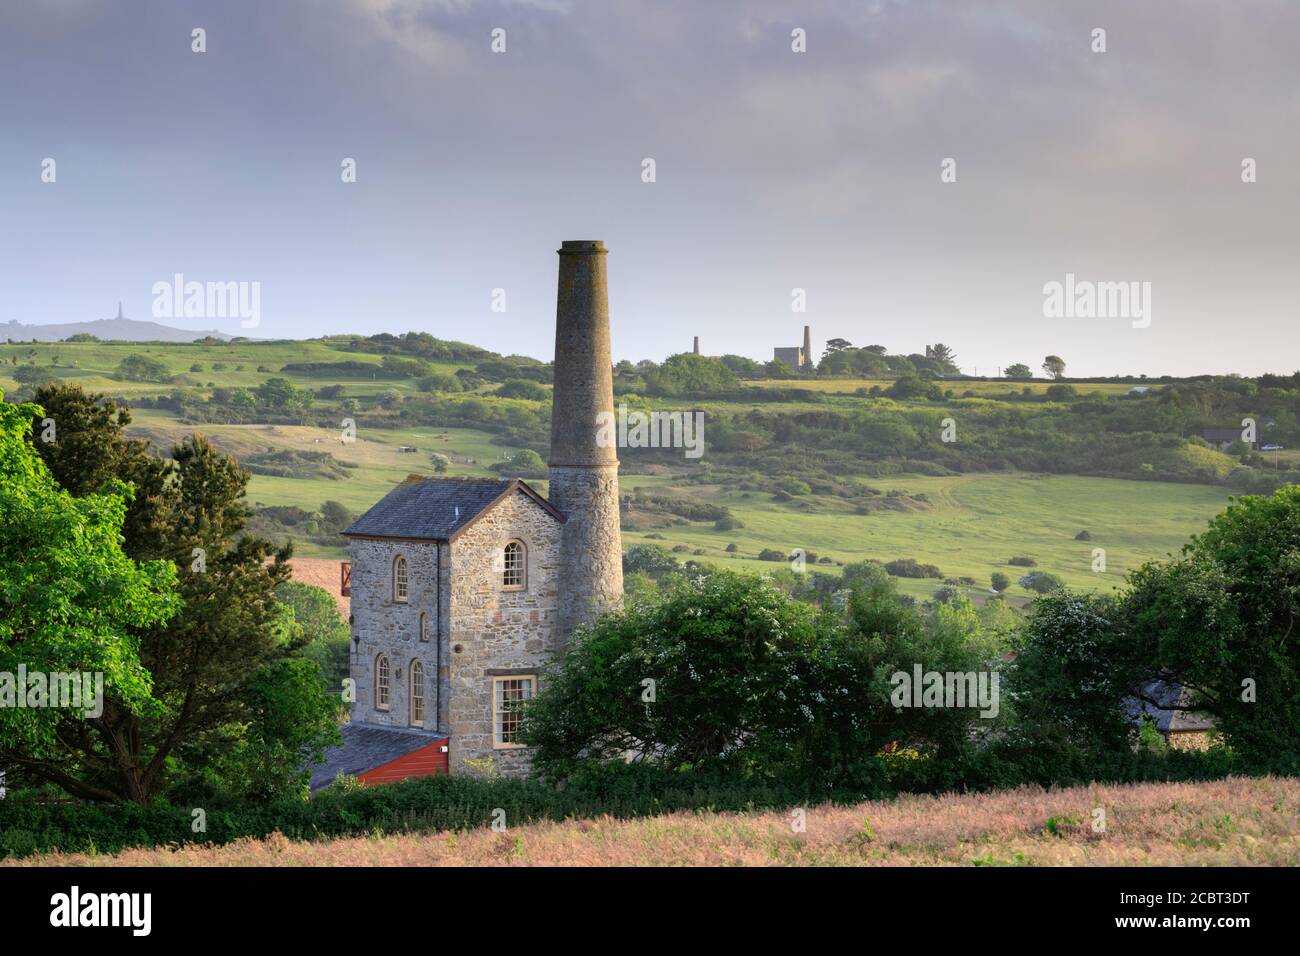 Wheal Rose Engine House with the engine houses at Wheal Peevor in the distance.  The image was captured on an evening in early June. Stock Photo